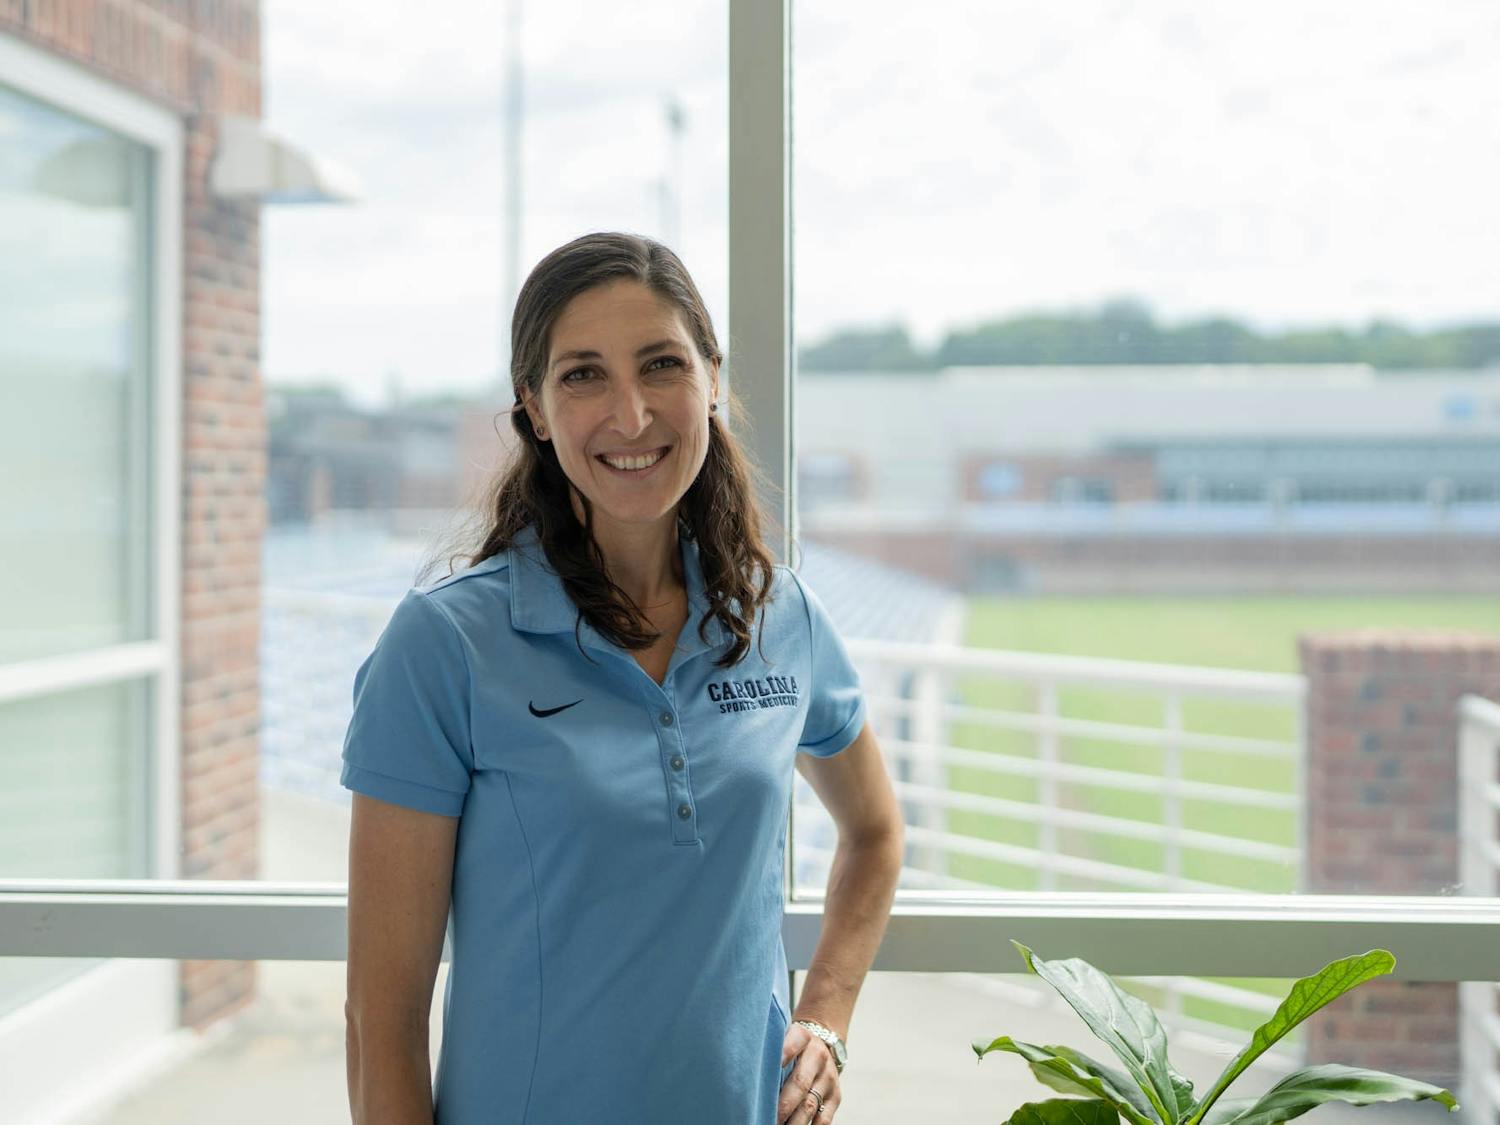 Dr. Jeni Shannon, director of the Carolina Athletics Mental Health and Performance Psychology Program (AMP), poses for a portrait in her office in the McCaskill Soccer Center on Monday, June 20, 2022